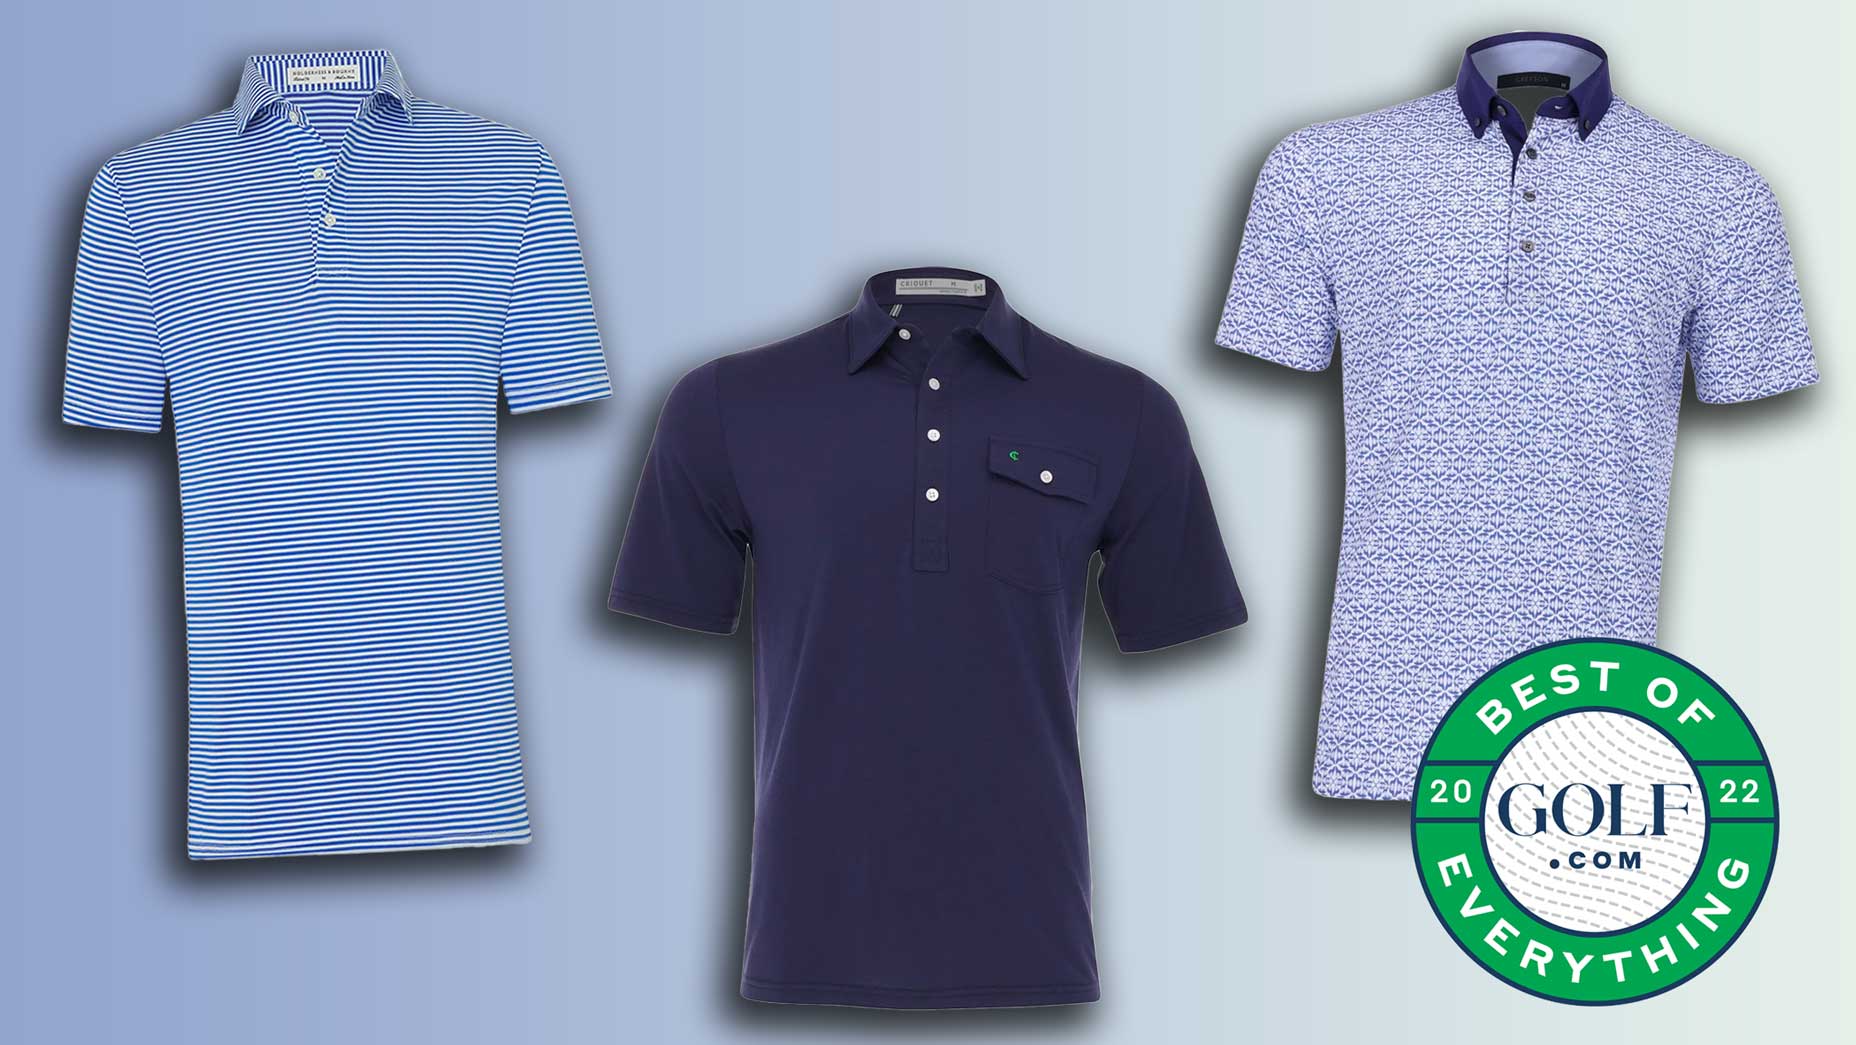 Best Polo Shirts for Men 2022: Luxury Polo Shirt Brands for Guys